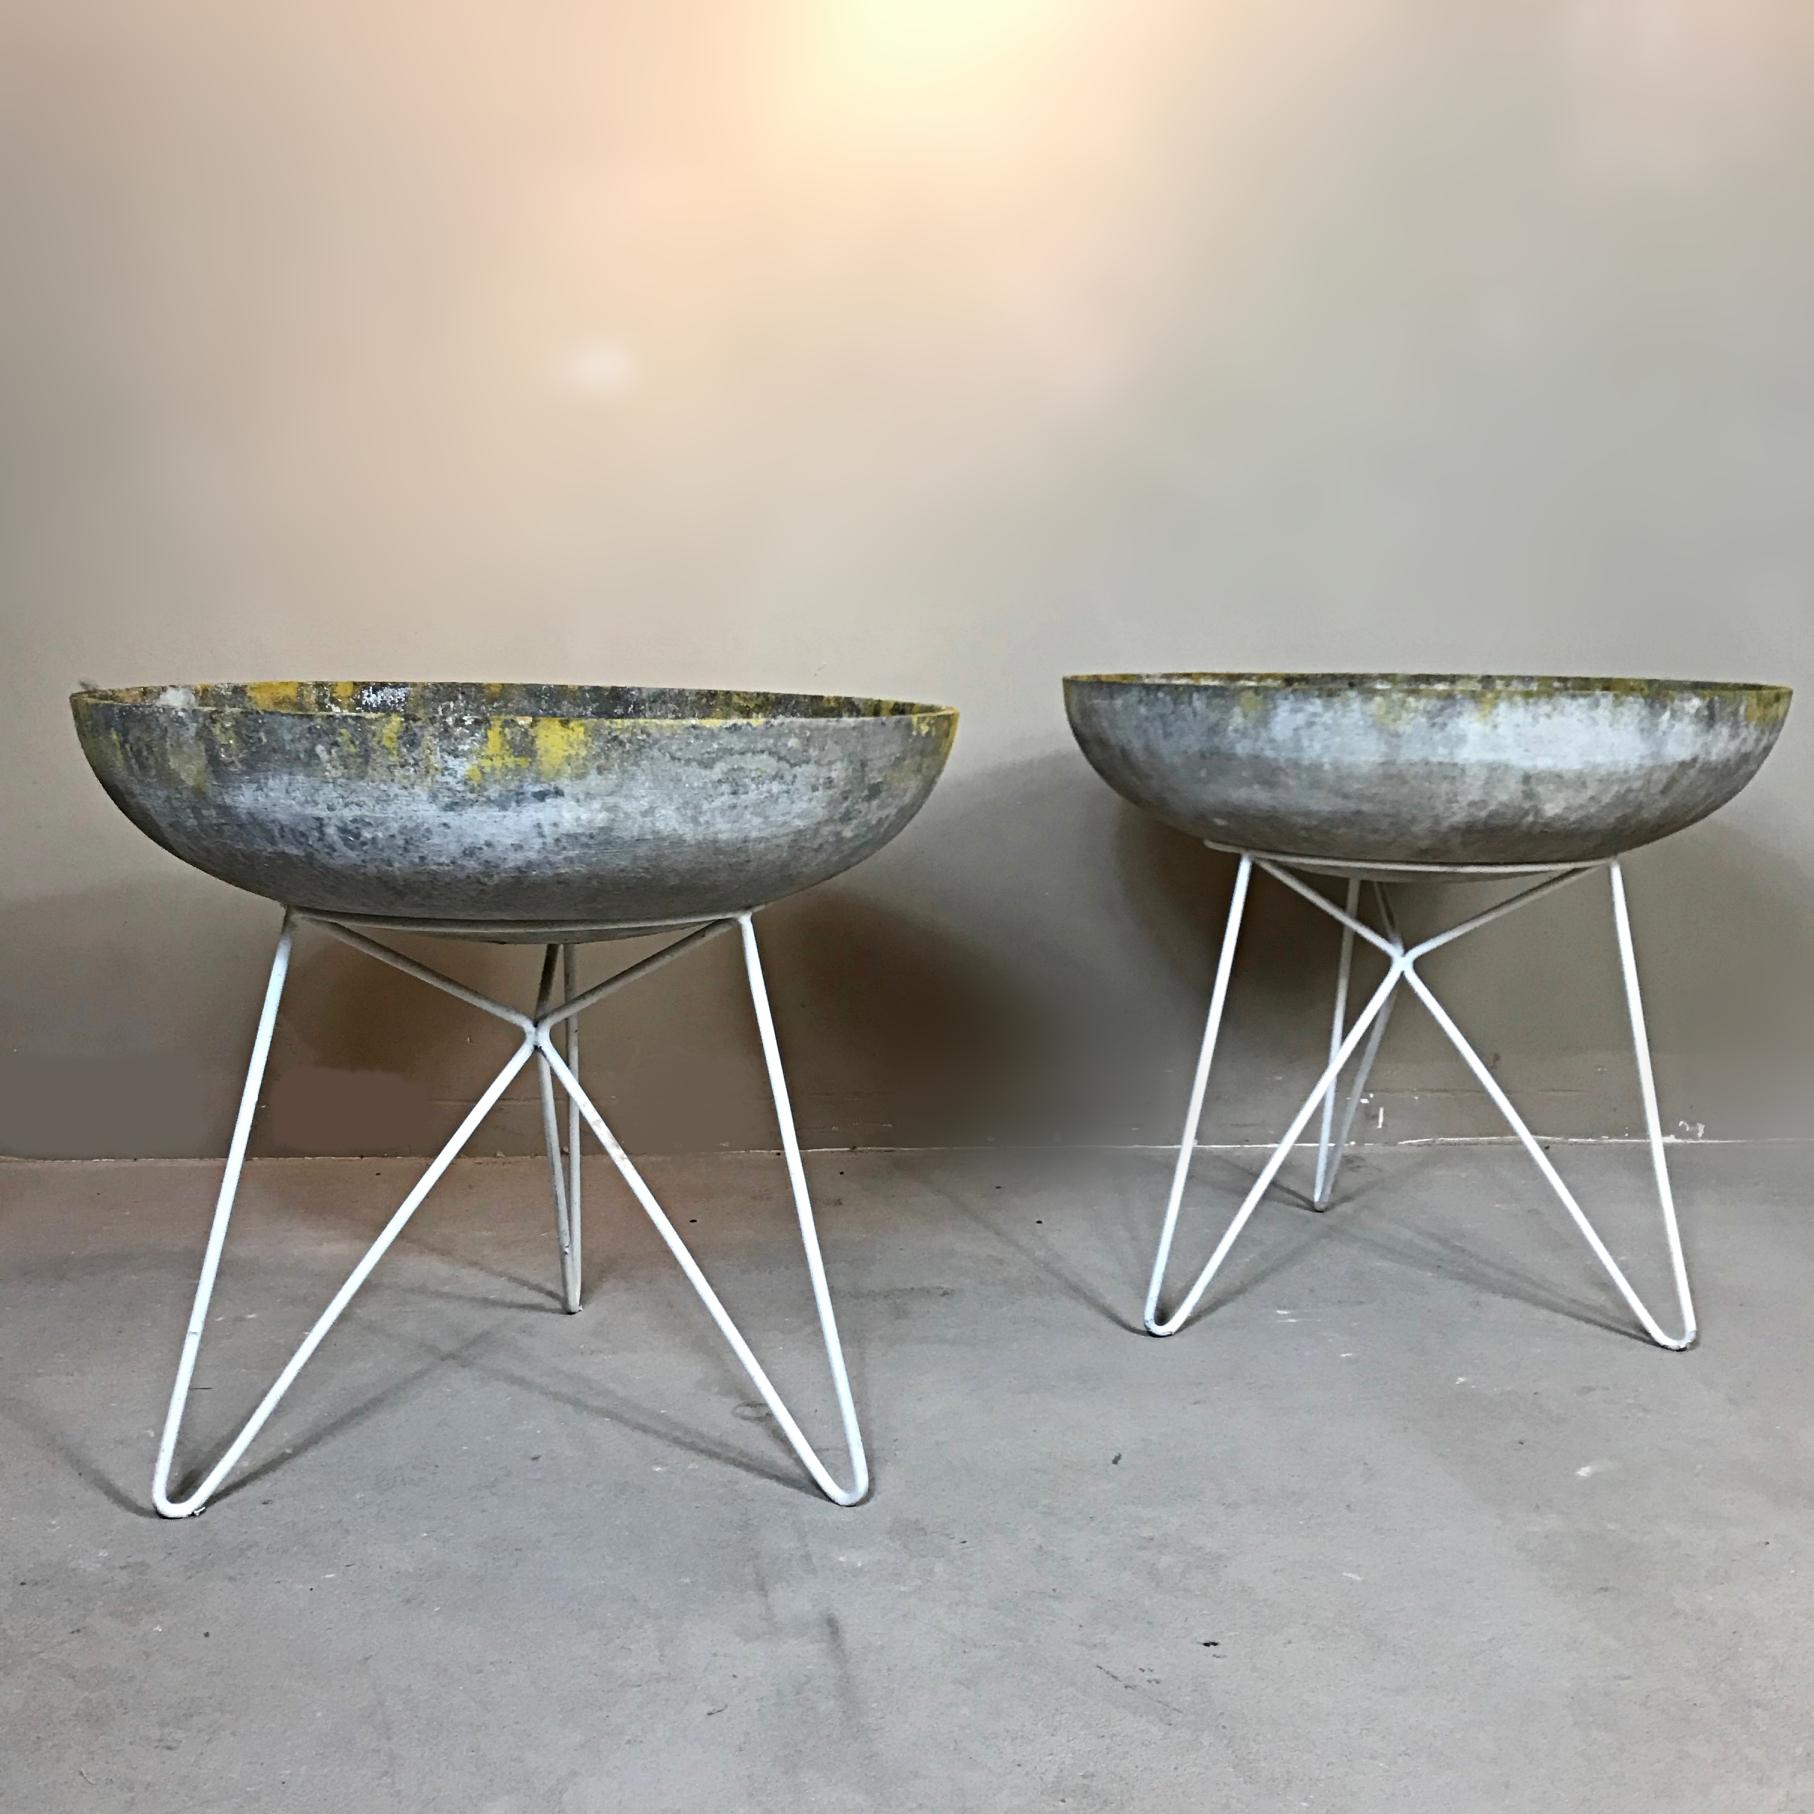 Karl Fostel Sonett formed stone saucer planter on a white lacquered hairpin iron base. Quite a rare offering from the famed Austrian architects, V. Mödlhammer and J. O. Wladar. We like the contrasting color tones and the lovely patina. They give